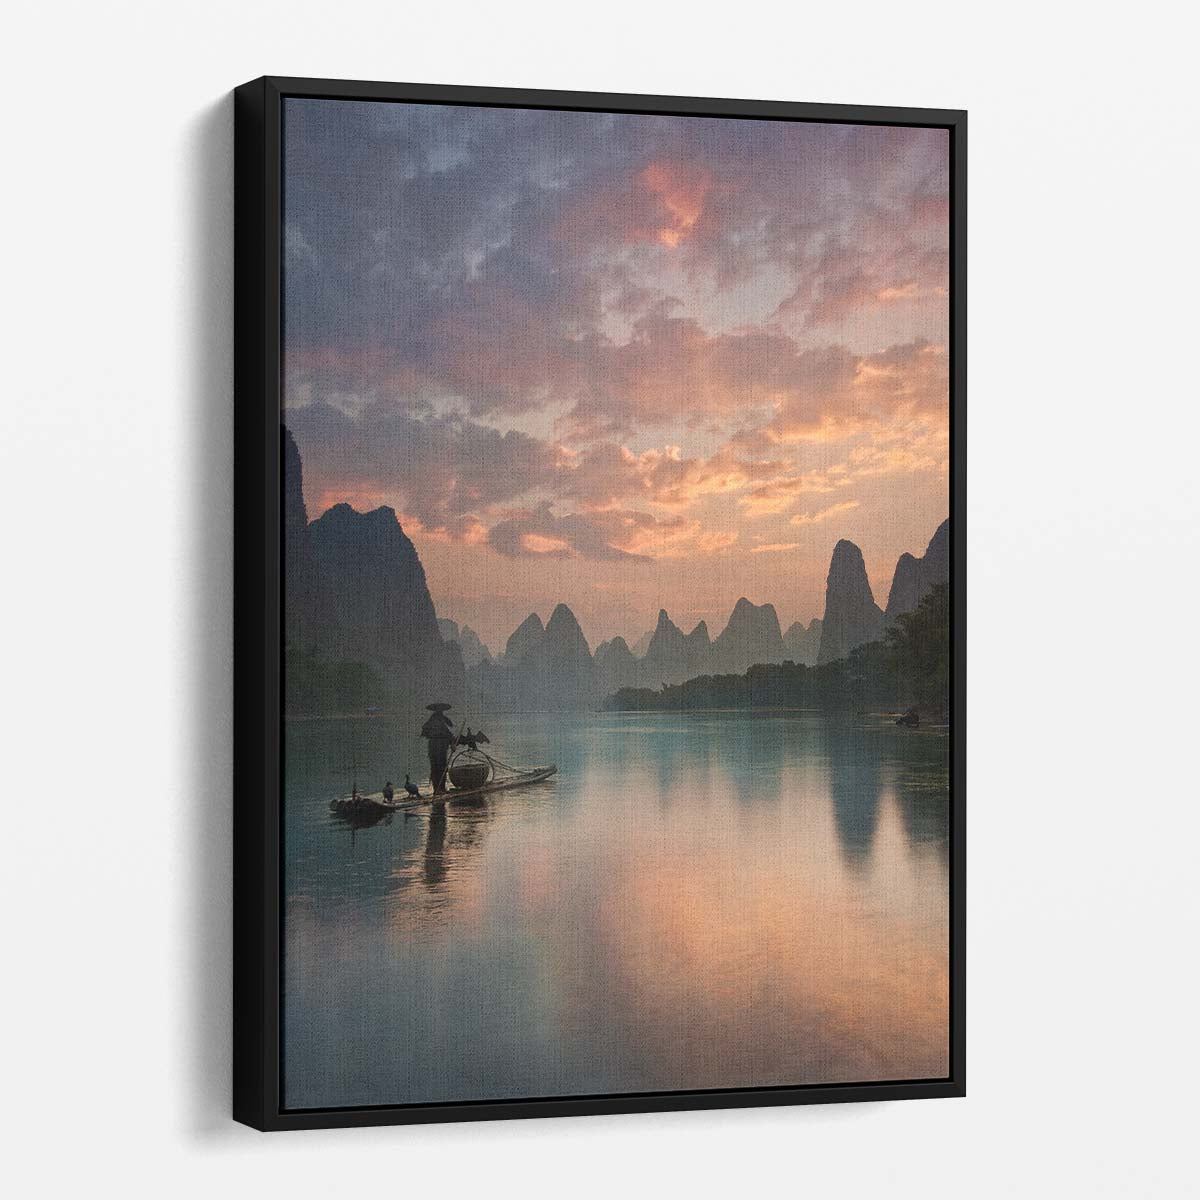 Yan Zhang's Li River Sunrise Landscape Photography, China by Luxuriance Designs, made in USA